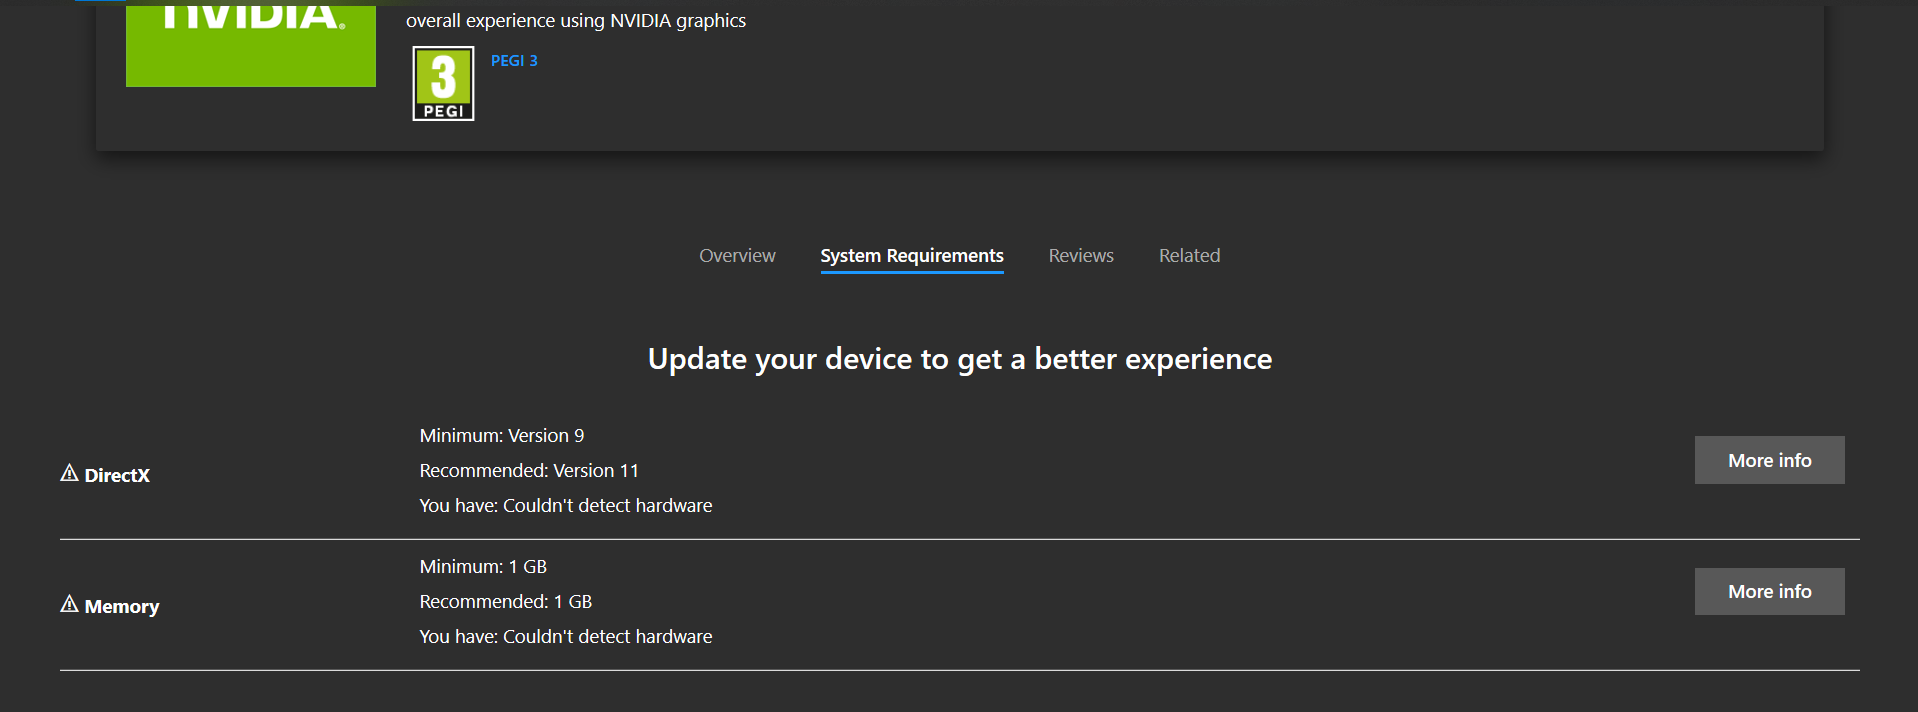 Microsoft Store "Hardware Not detected" 74e6477d-7ddb-4462-a685-212e710c1ab1?upload=true.png